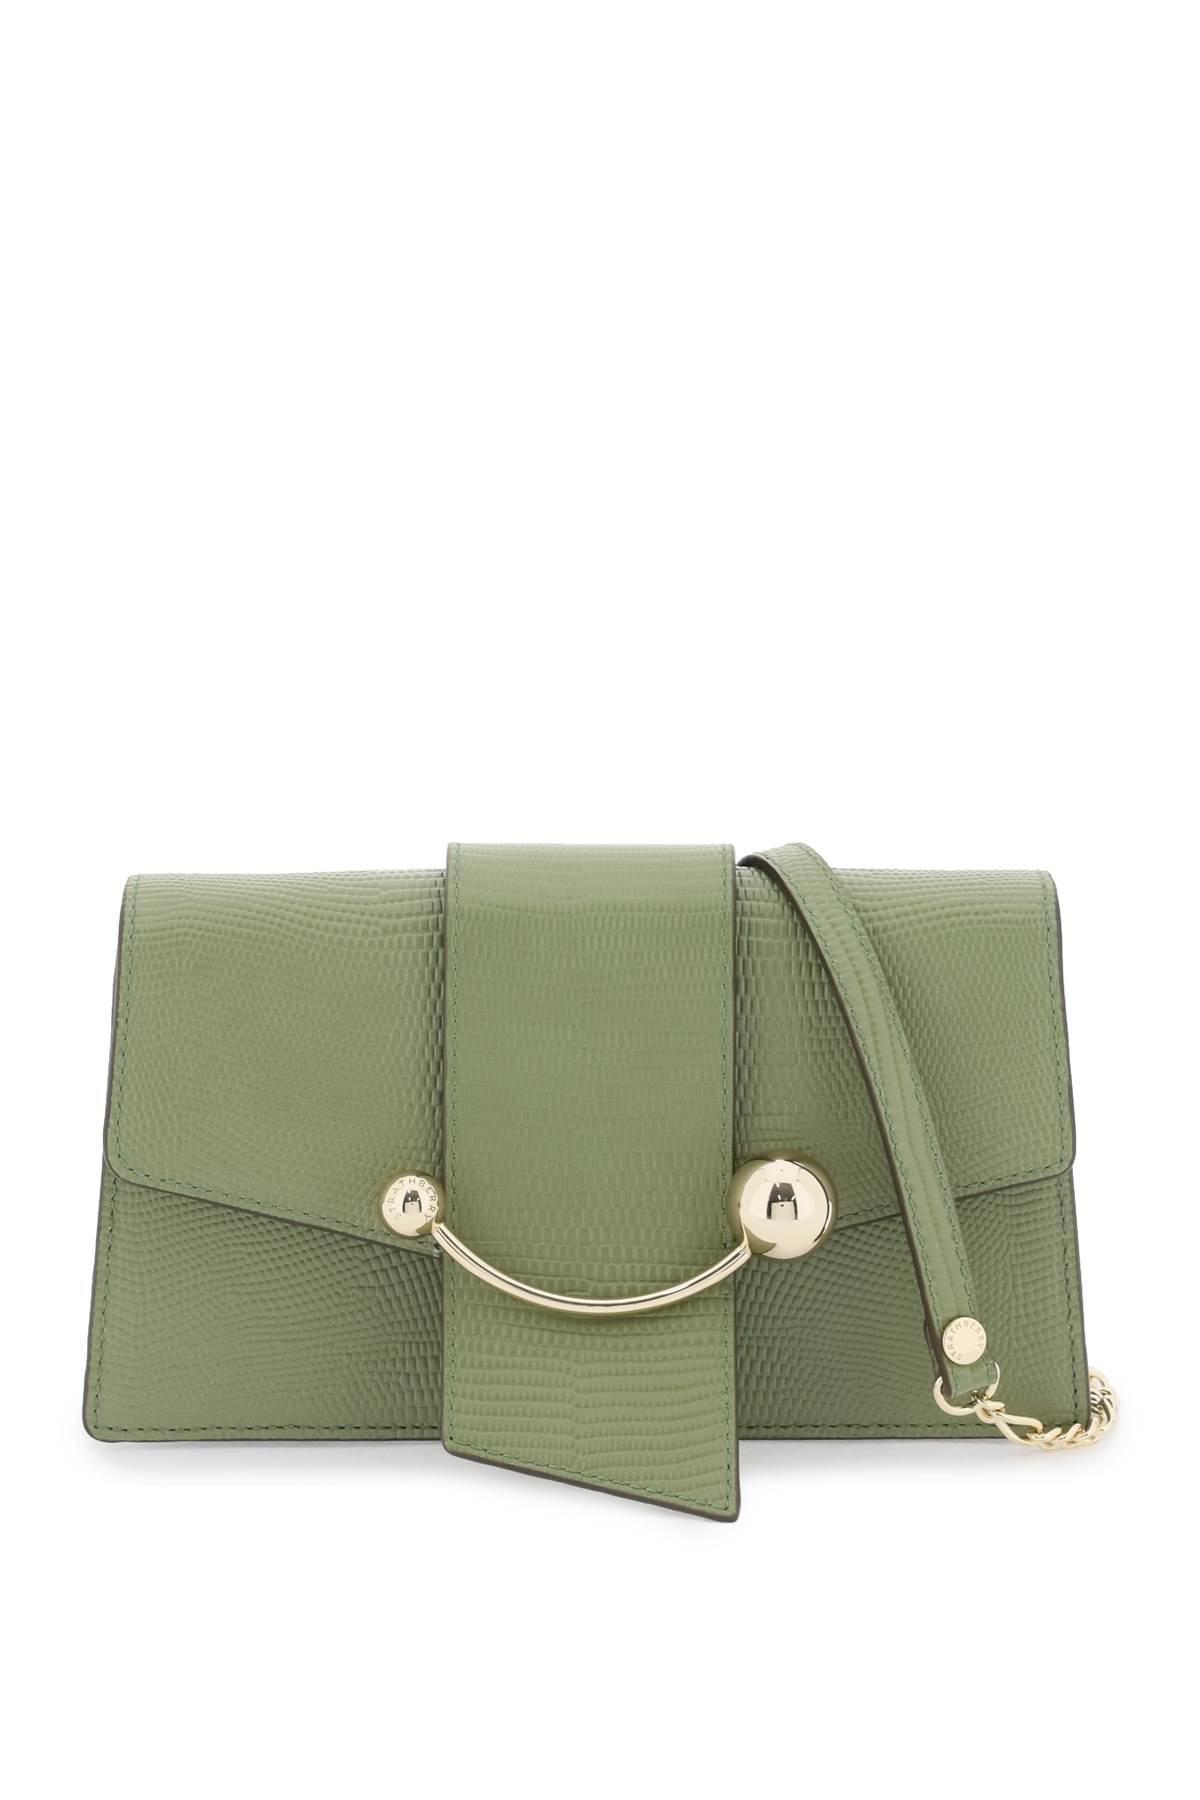 Strathberry 'crescent On A Chain' Crossbody Mini Bag in Green | Lyst